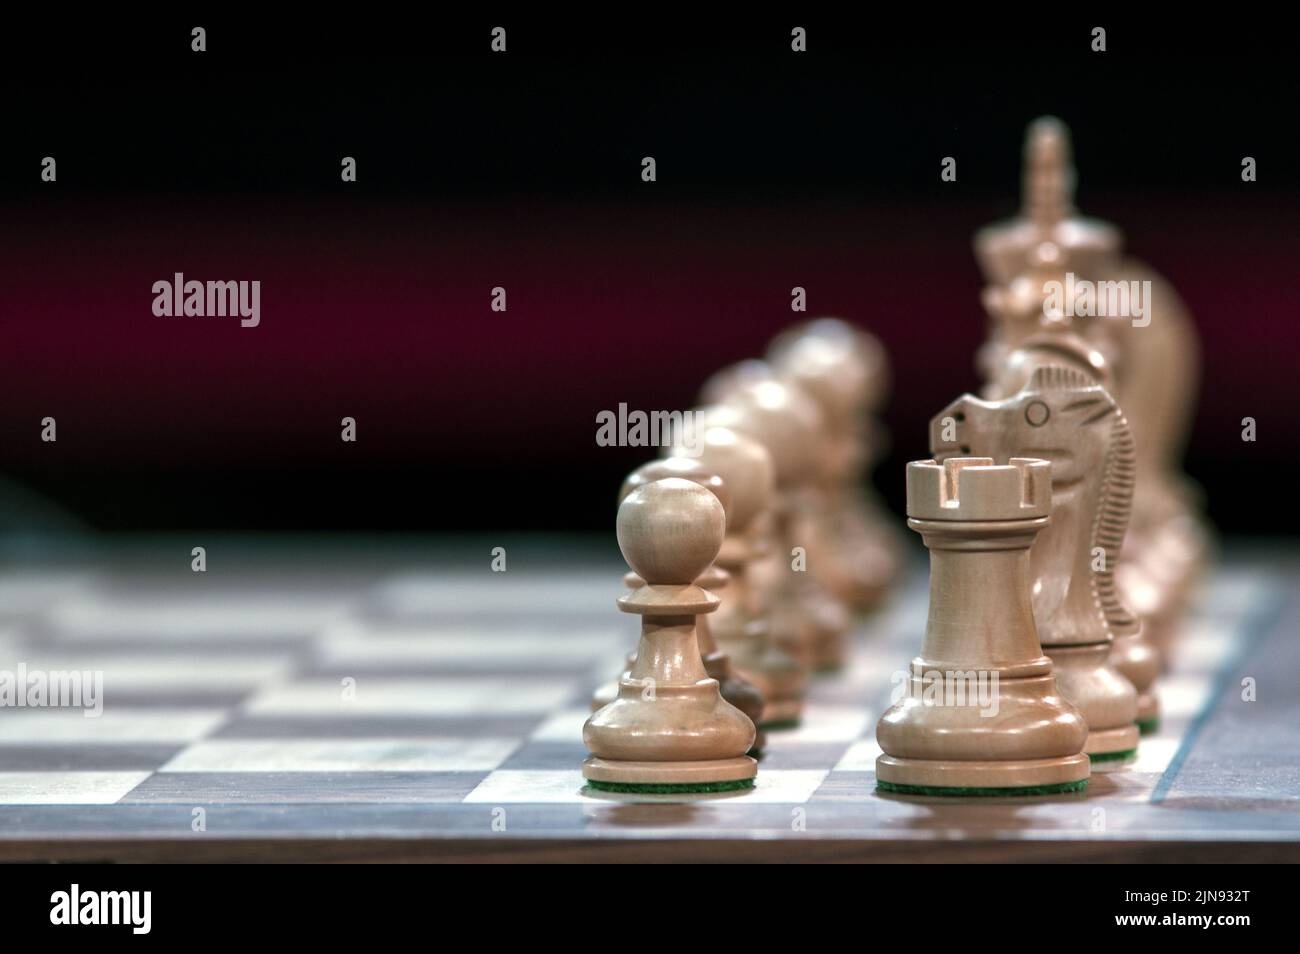 Close-up photo of chess pieces on a chess board with a beautiful blurry background. Rook, knight and pawn in the foreground. Stock Photo